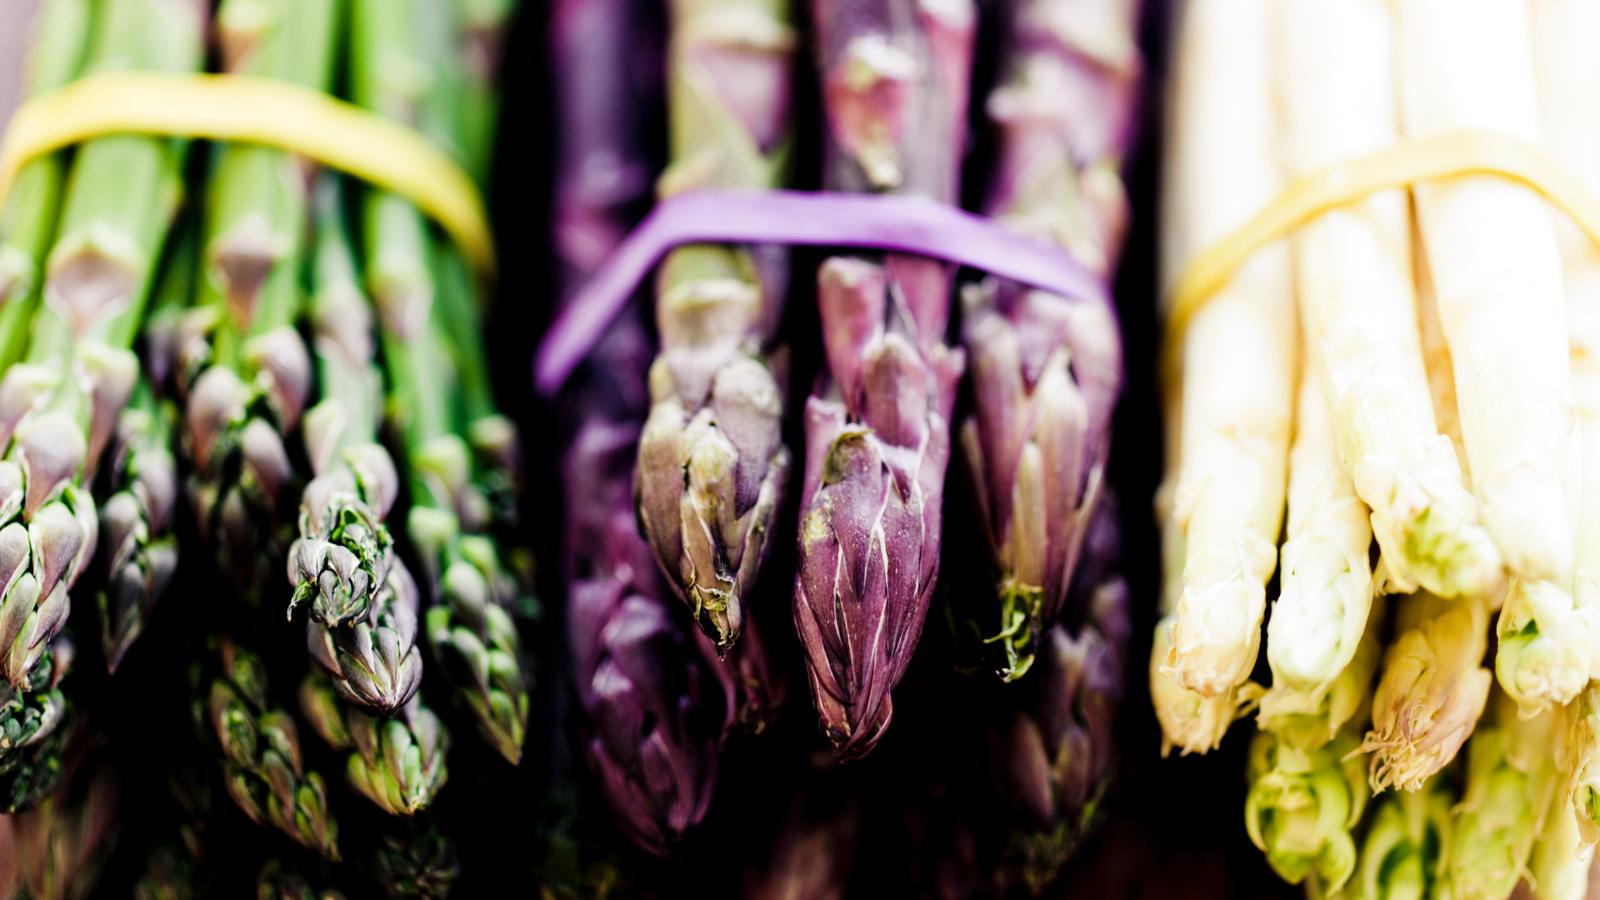 Green, white, and purple asparagus varieties.